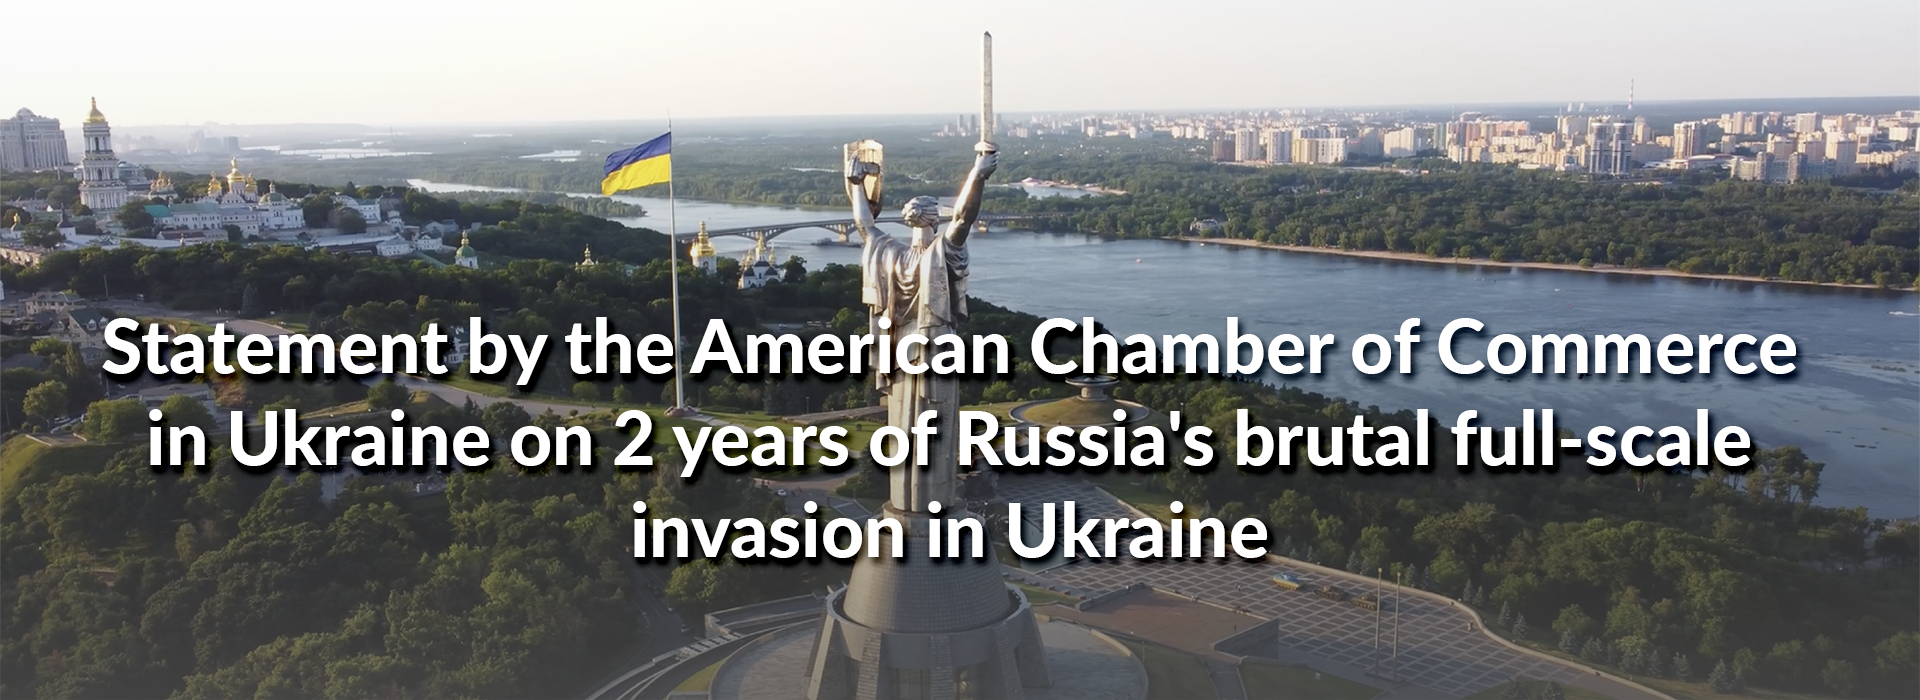 Statement by the American Chamber of Commerce in Ukraine on 2 years of Russia’s brutal full-scale invasion in Ukraine